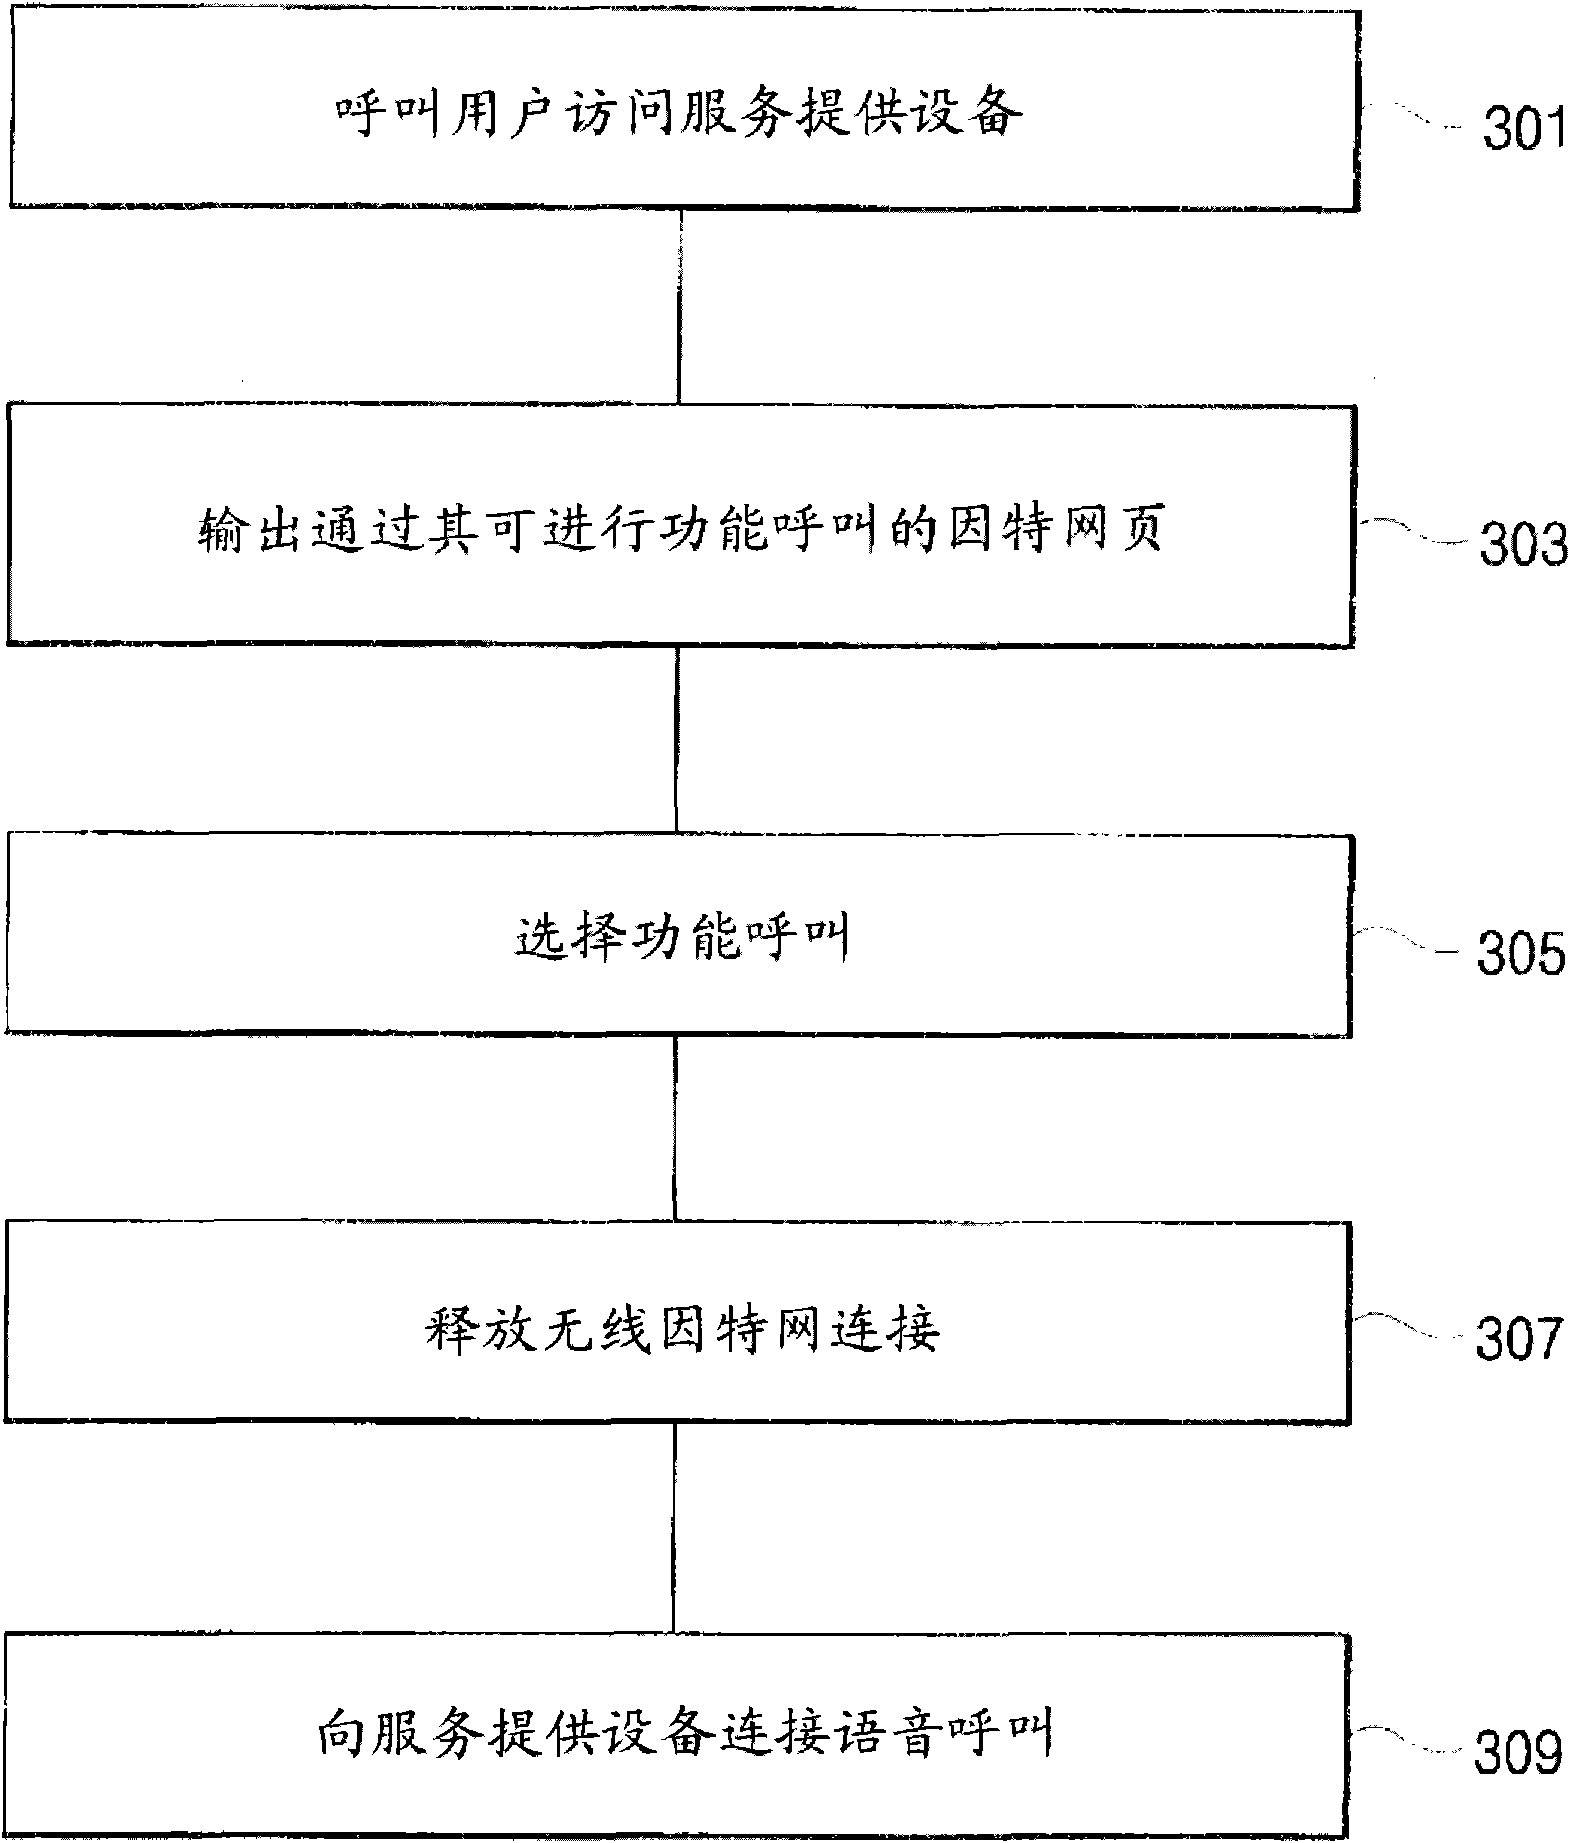 Method and apparatus for composing unified channel for variety communications in mobile network